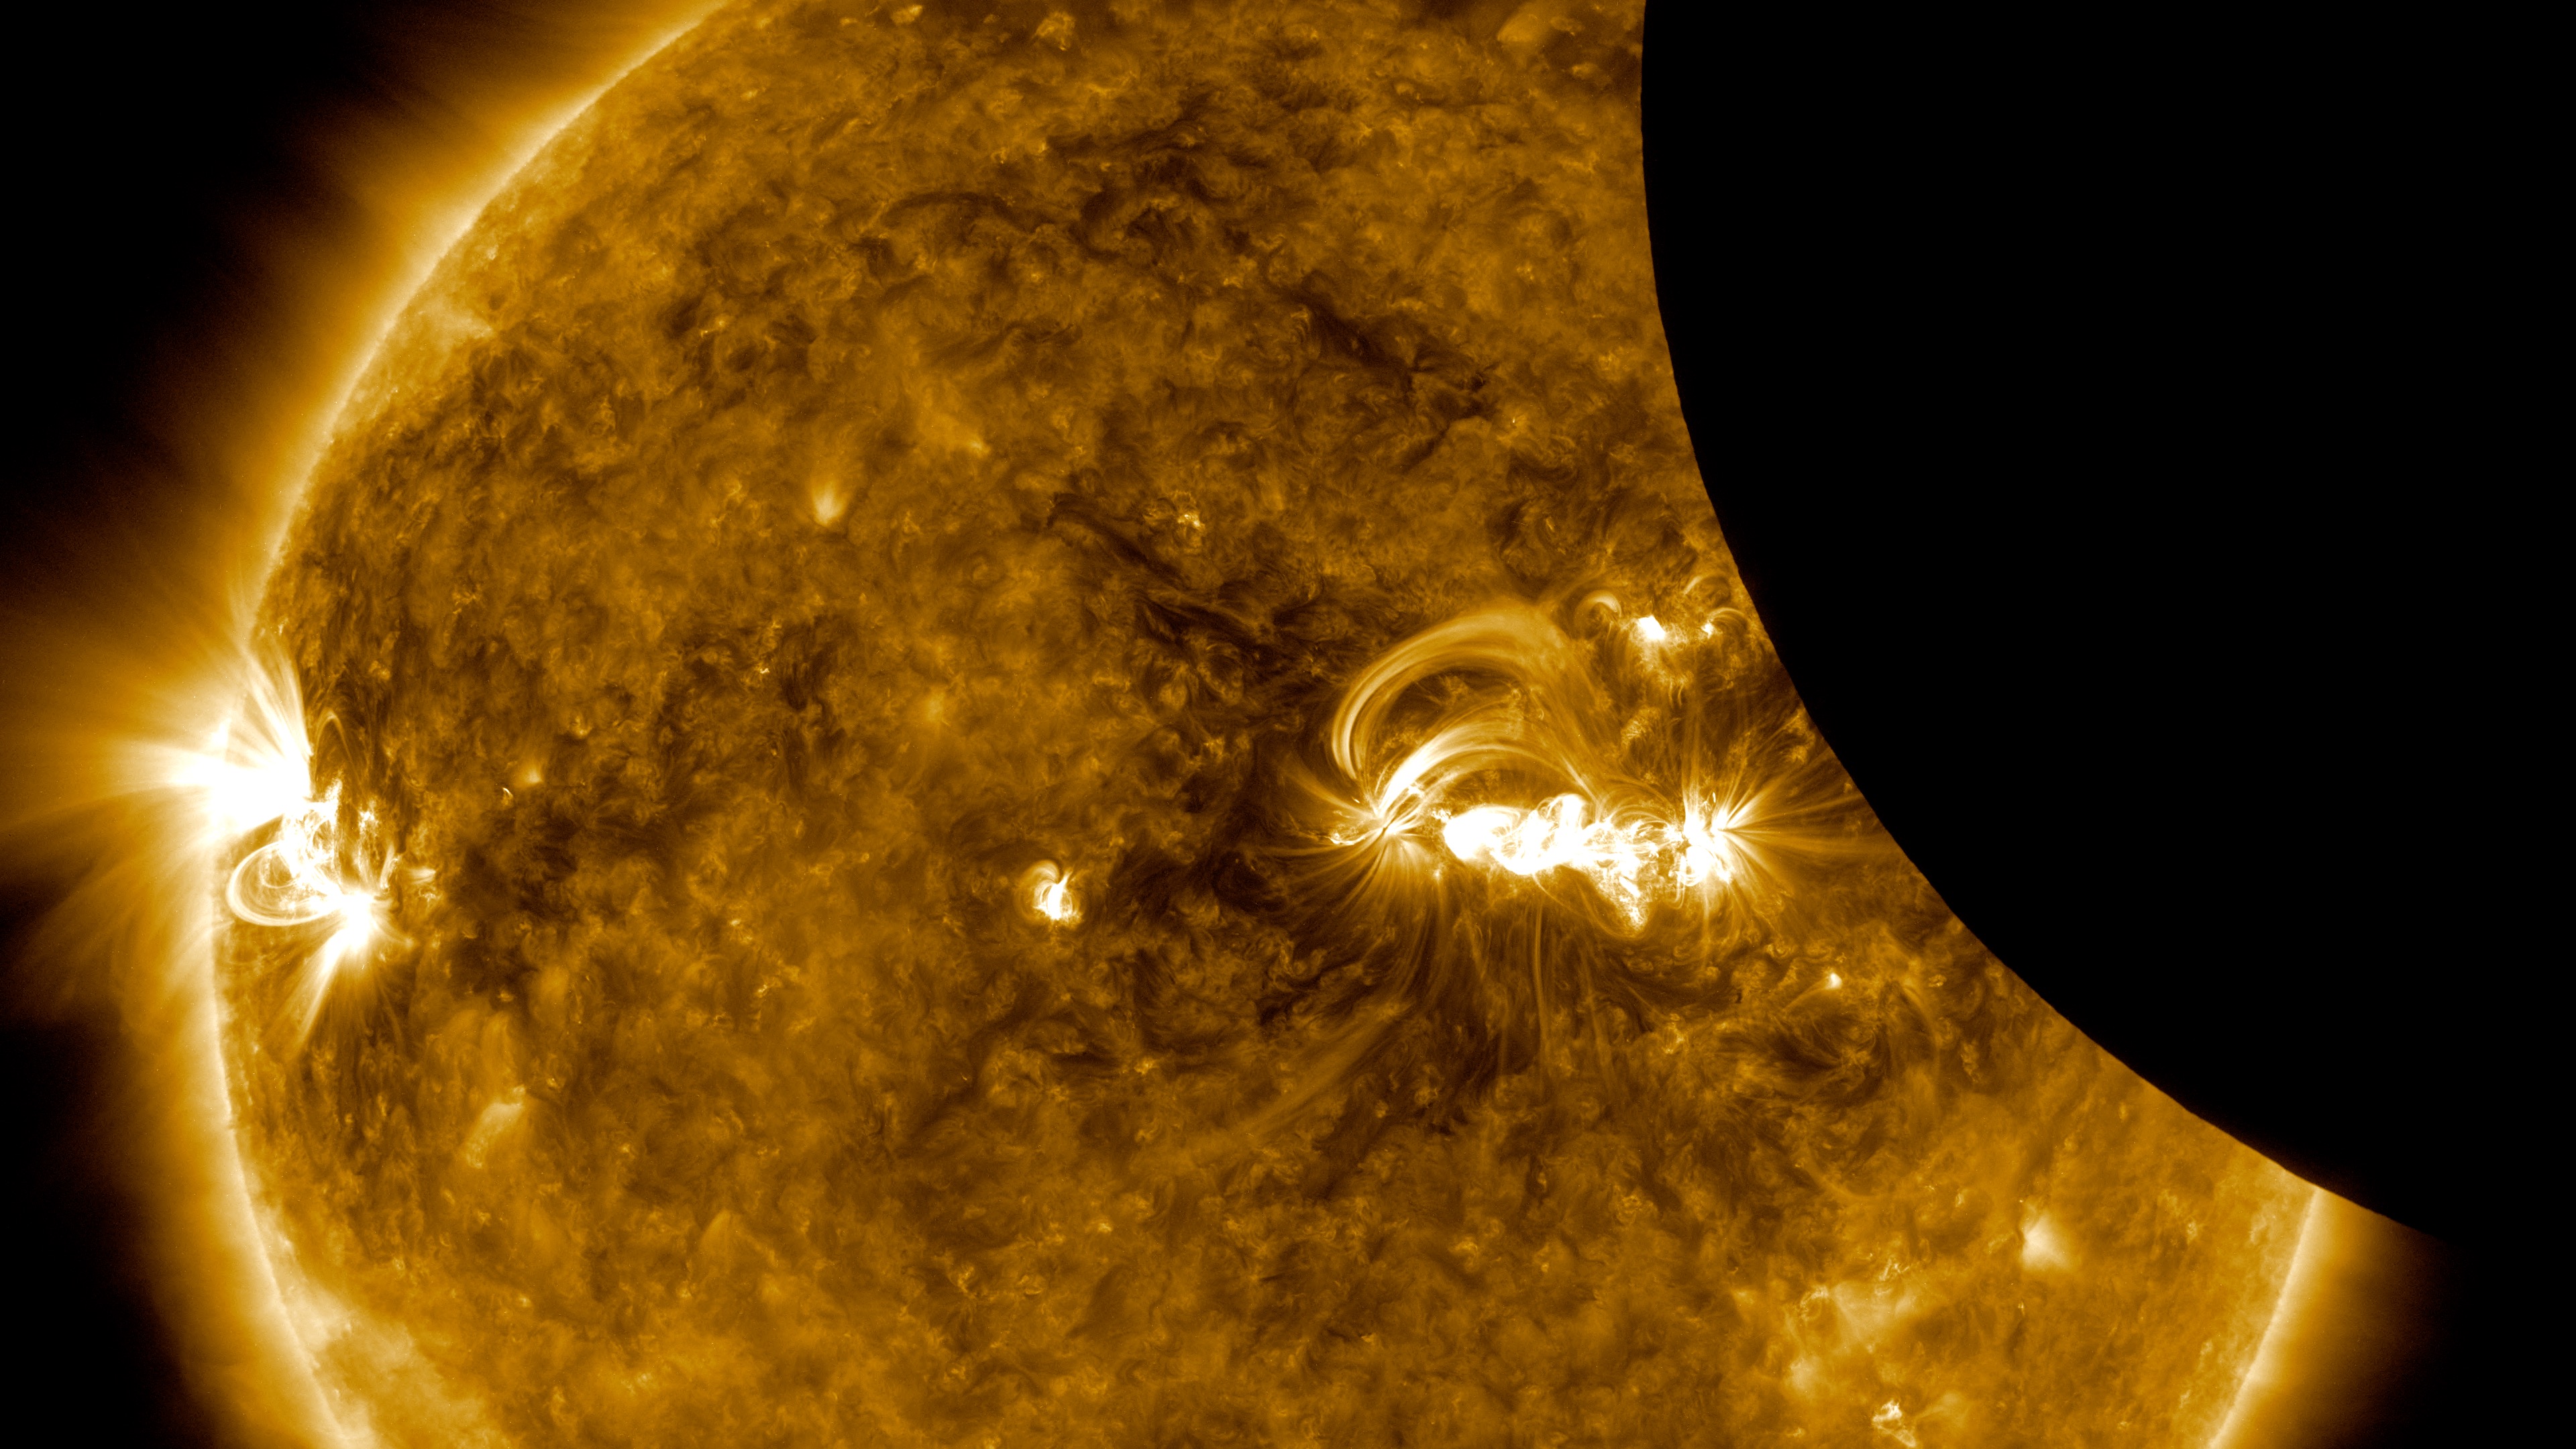 A movie of the Aug 21, 2017 lunar transit as viewed by the Solar Dynamics Observatory (SDO.) The Sun appears in visible light, and 171 &aring;ngstrom extreme ultraviolet light. The movie shows the Sun moving a bit because SDO has a hard time keeping the Sun centered in the image during a transit, because the Moon blocks so much light. The fine guidance systems on the SDO instruments need to see the whole Sun in order keep the images centered from exposure to exposure. Once the transit was over, the fine guidance systems started back up, once again providing steady images of the Sun.Credit: NASA/SDOWatch this video on the NASA Goddard YouTube channel.